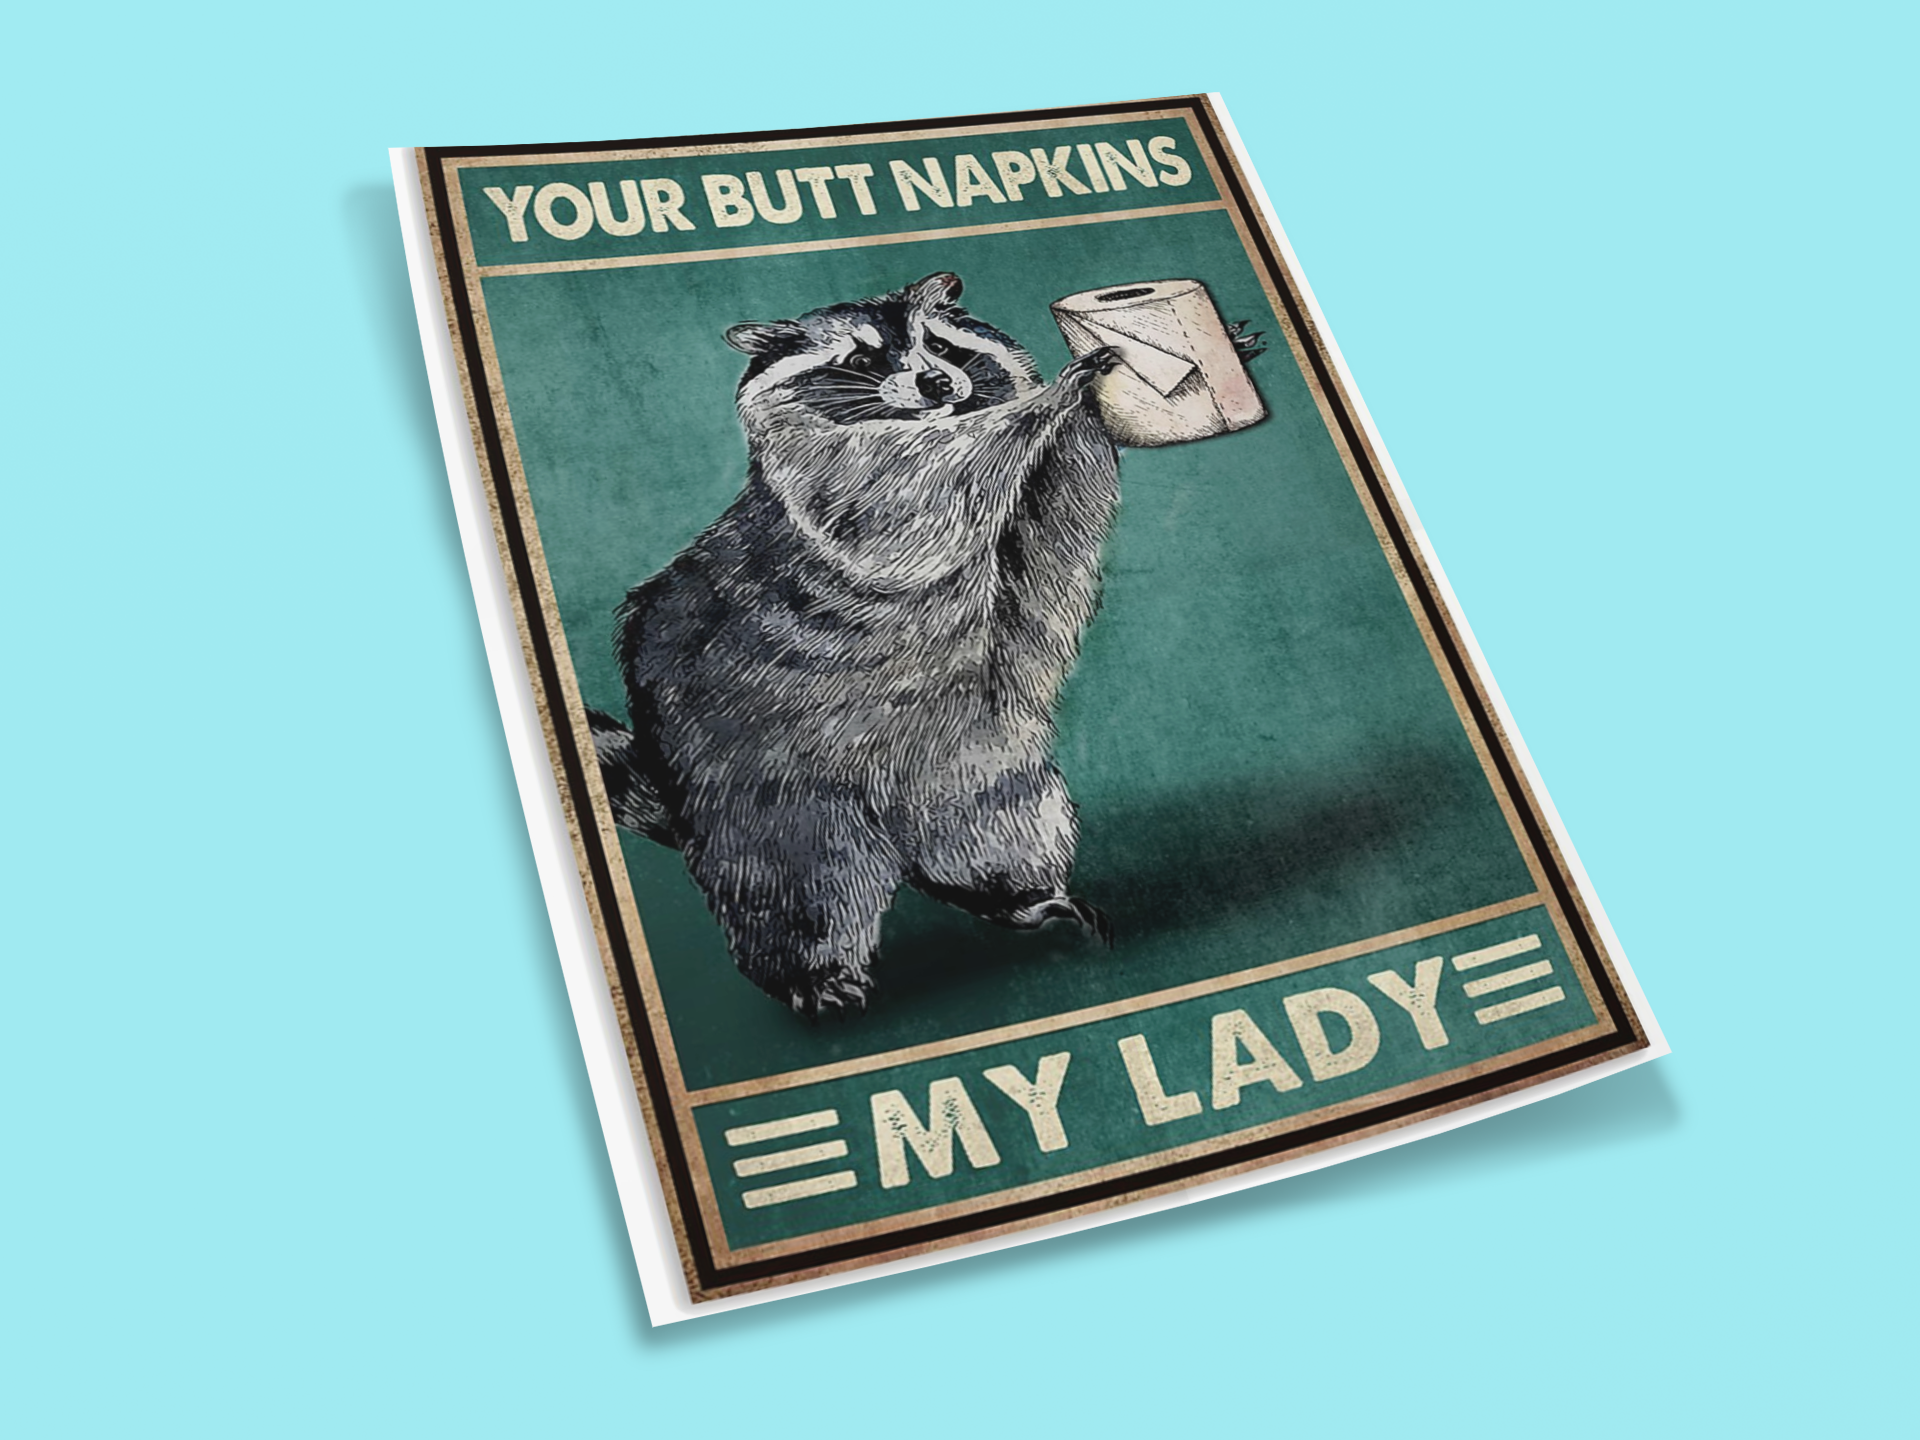 Raccoon your butt napkins my lady poster 3